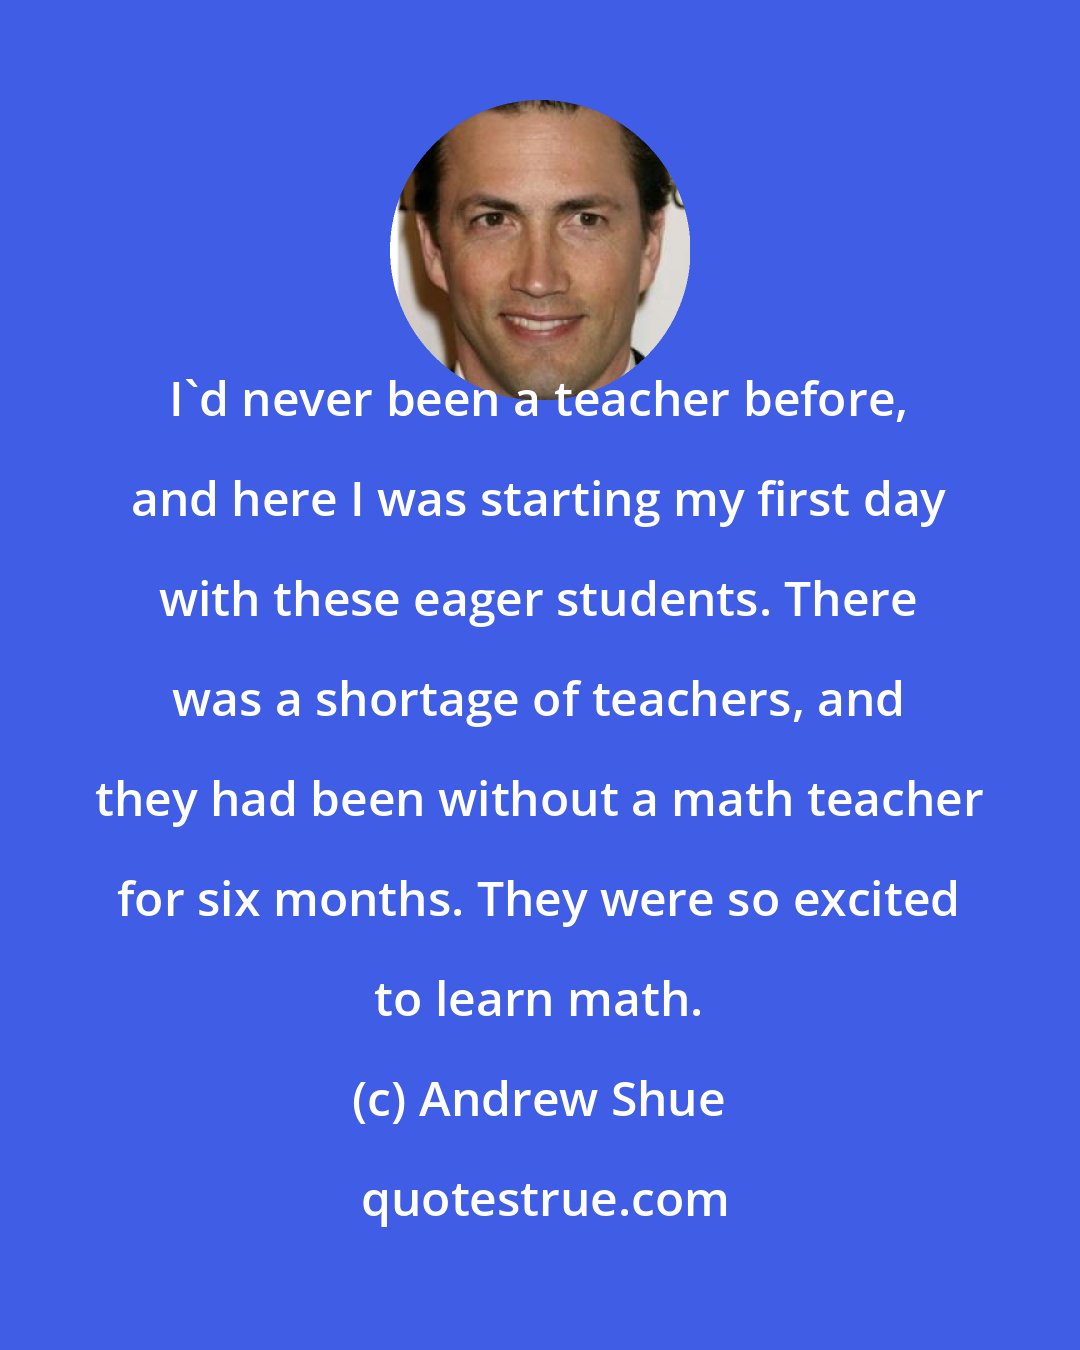 Andrew Shue: I'd never been a teacher before, and here I was starting my first day with these eager students. There was a shortage of teachers, and they had been without a math teacher for six months. They were so excited to learn math.